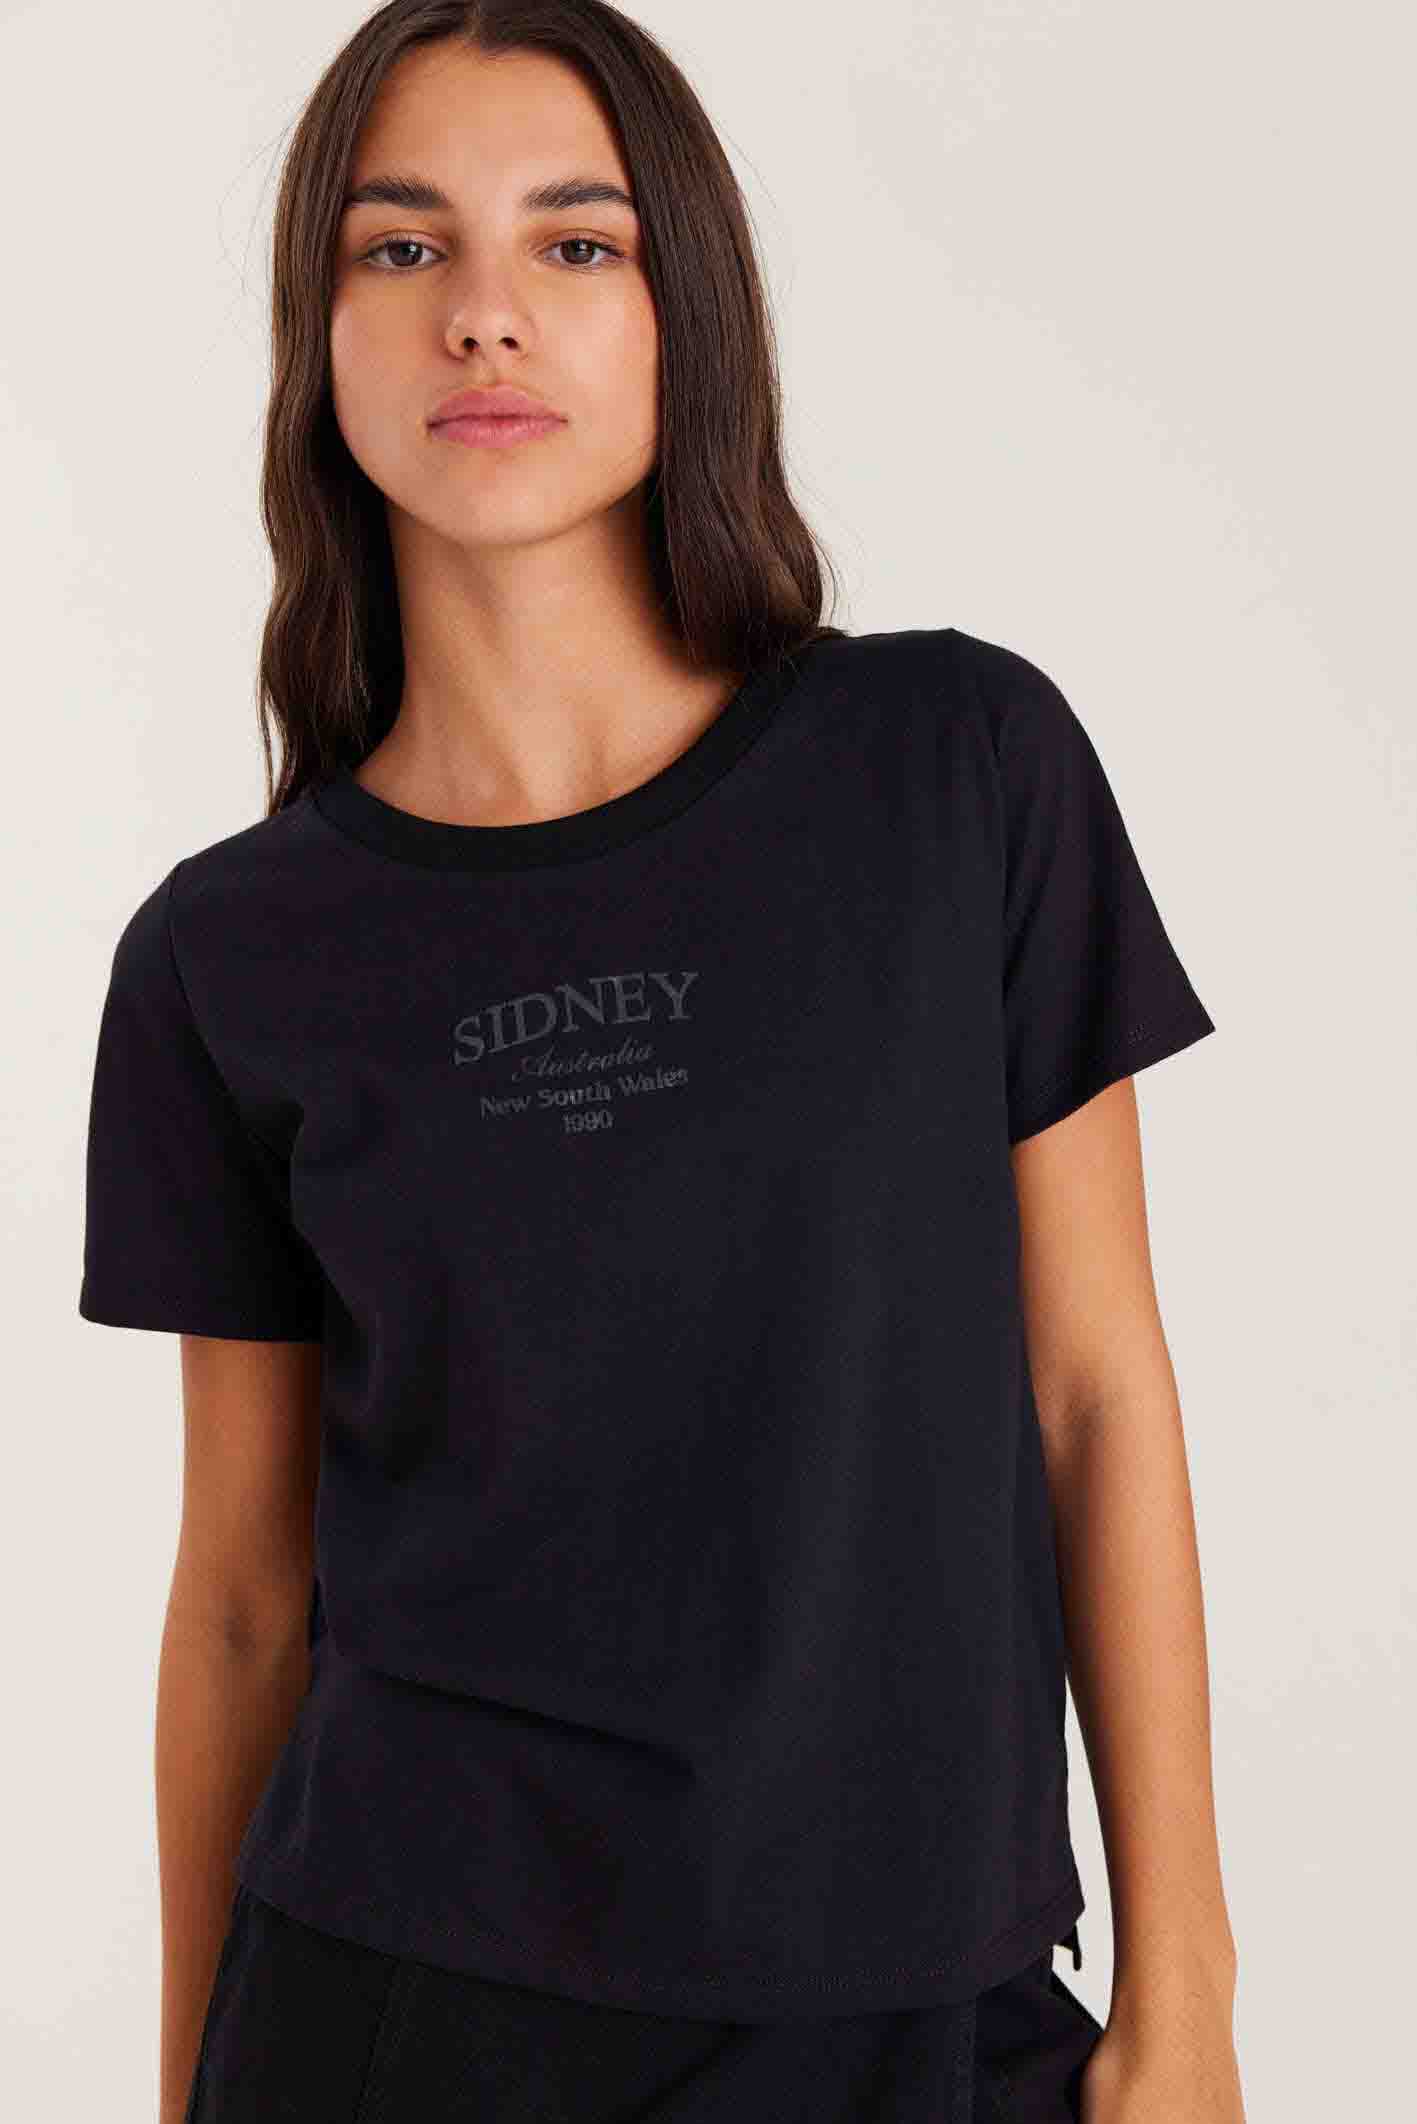 comoquieres_remera-sidney-xs-l_00-08-2024__picture-43728